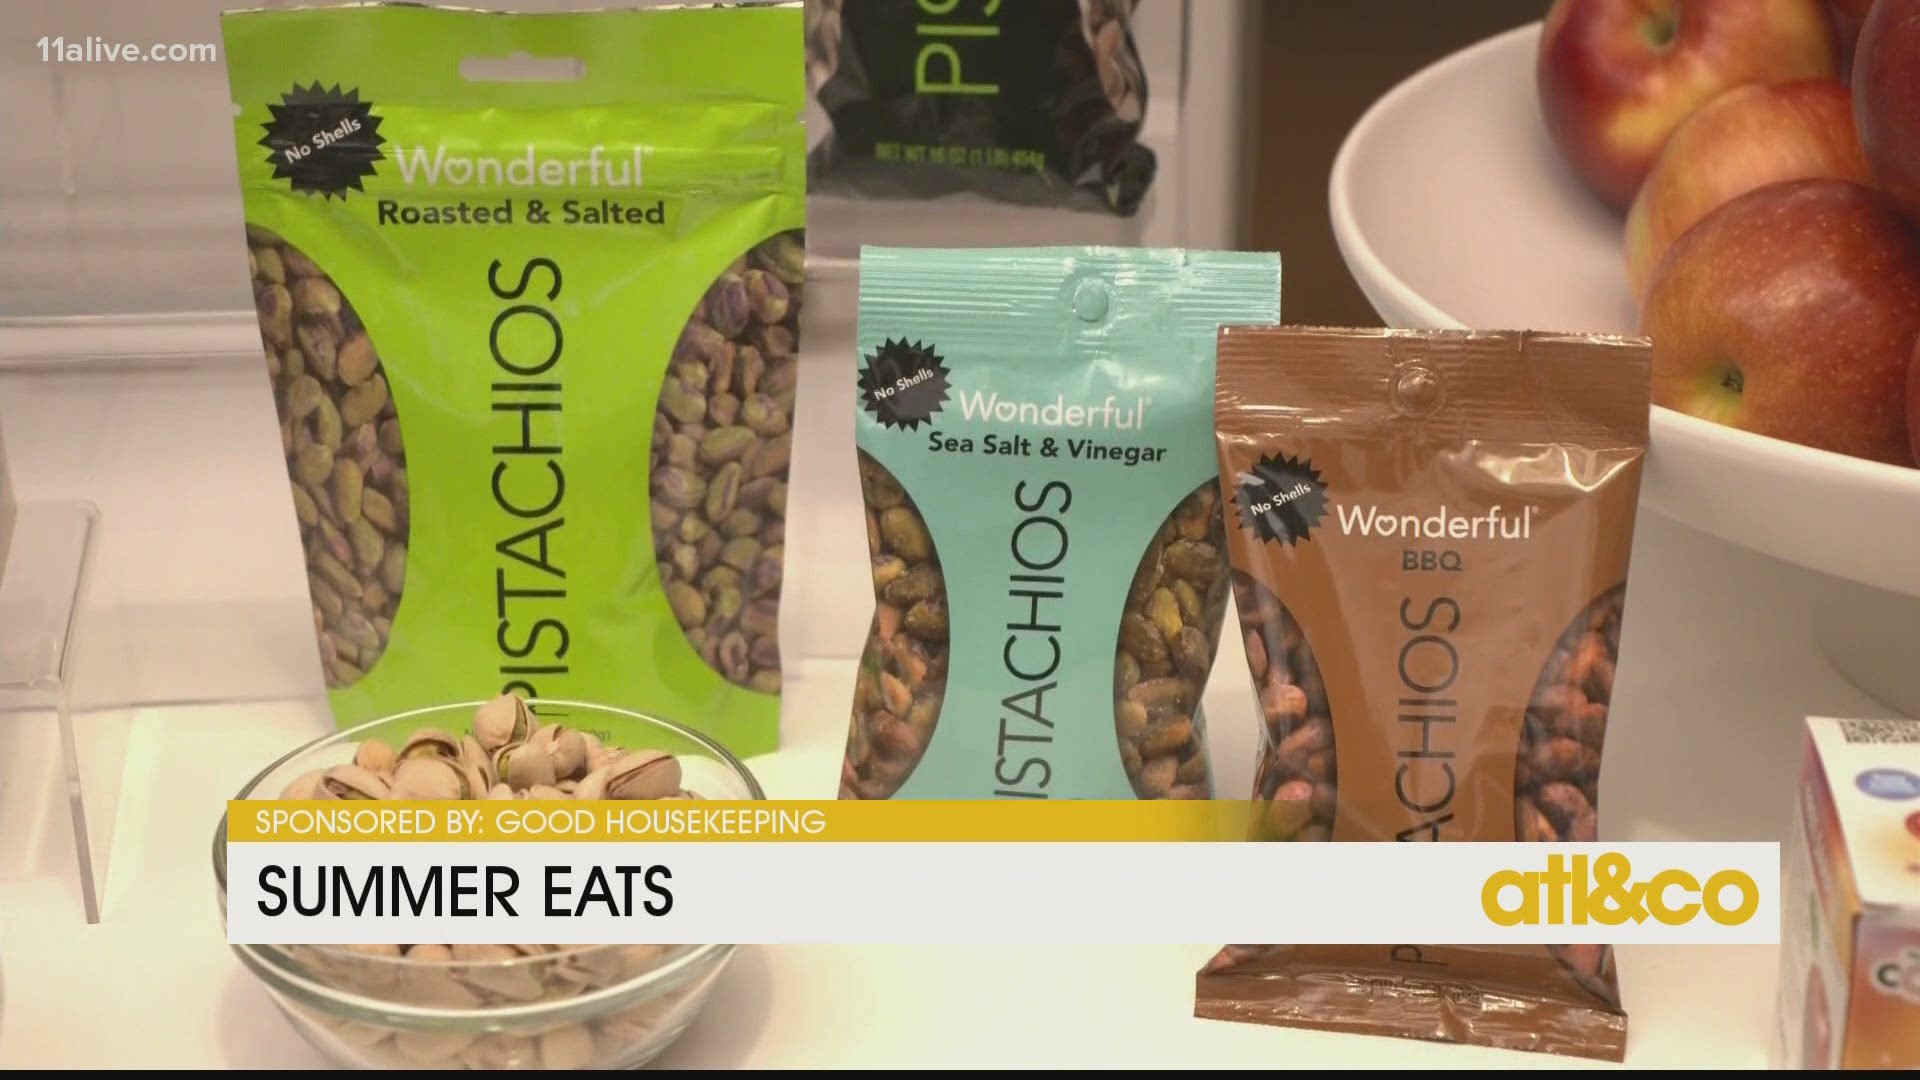 Maintain a healthy lifestyle with these smart summer snacks from Good Housekeeping!